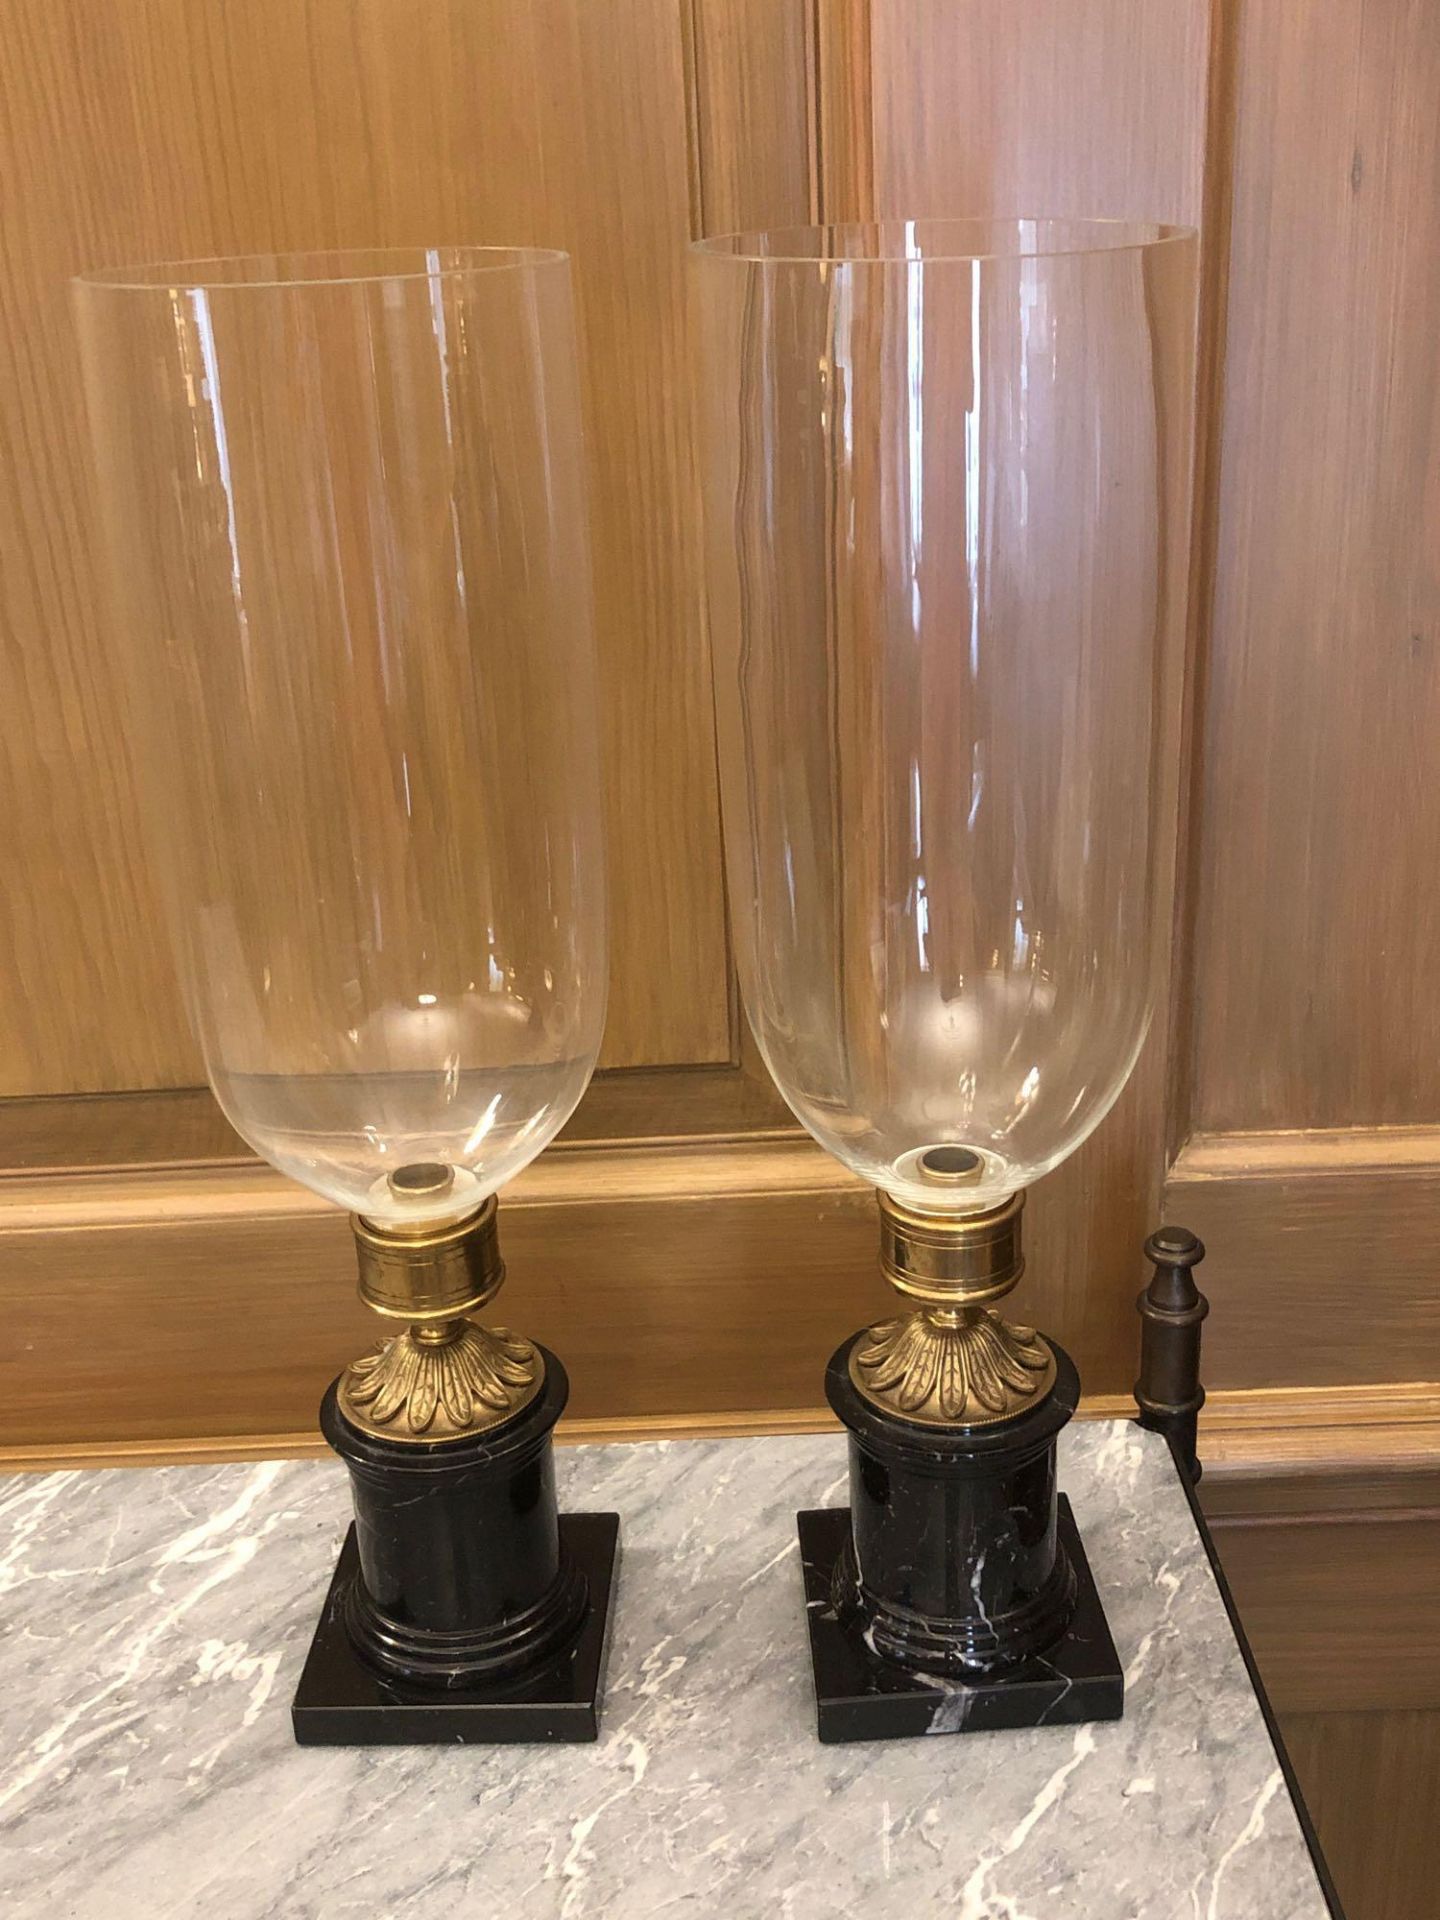 A Pair Of Candle Holders With Tall Glass Shades And Brass Featuring Ornamental Design 42cm (Room